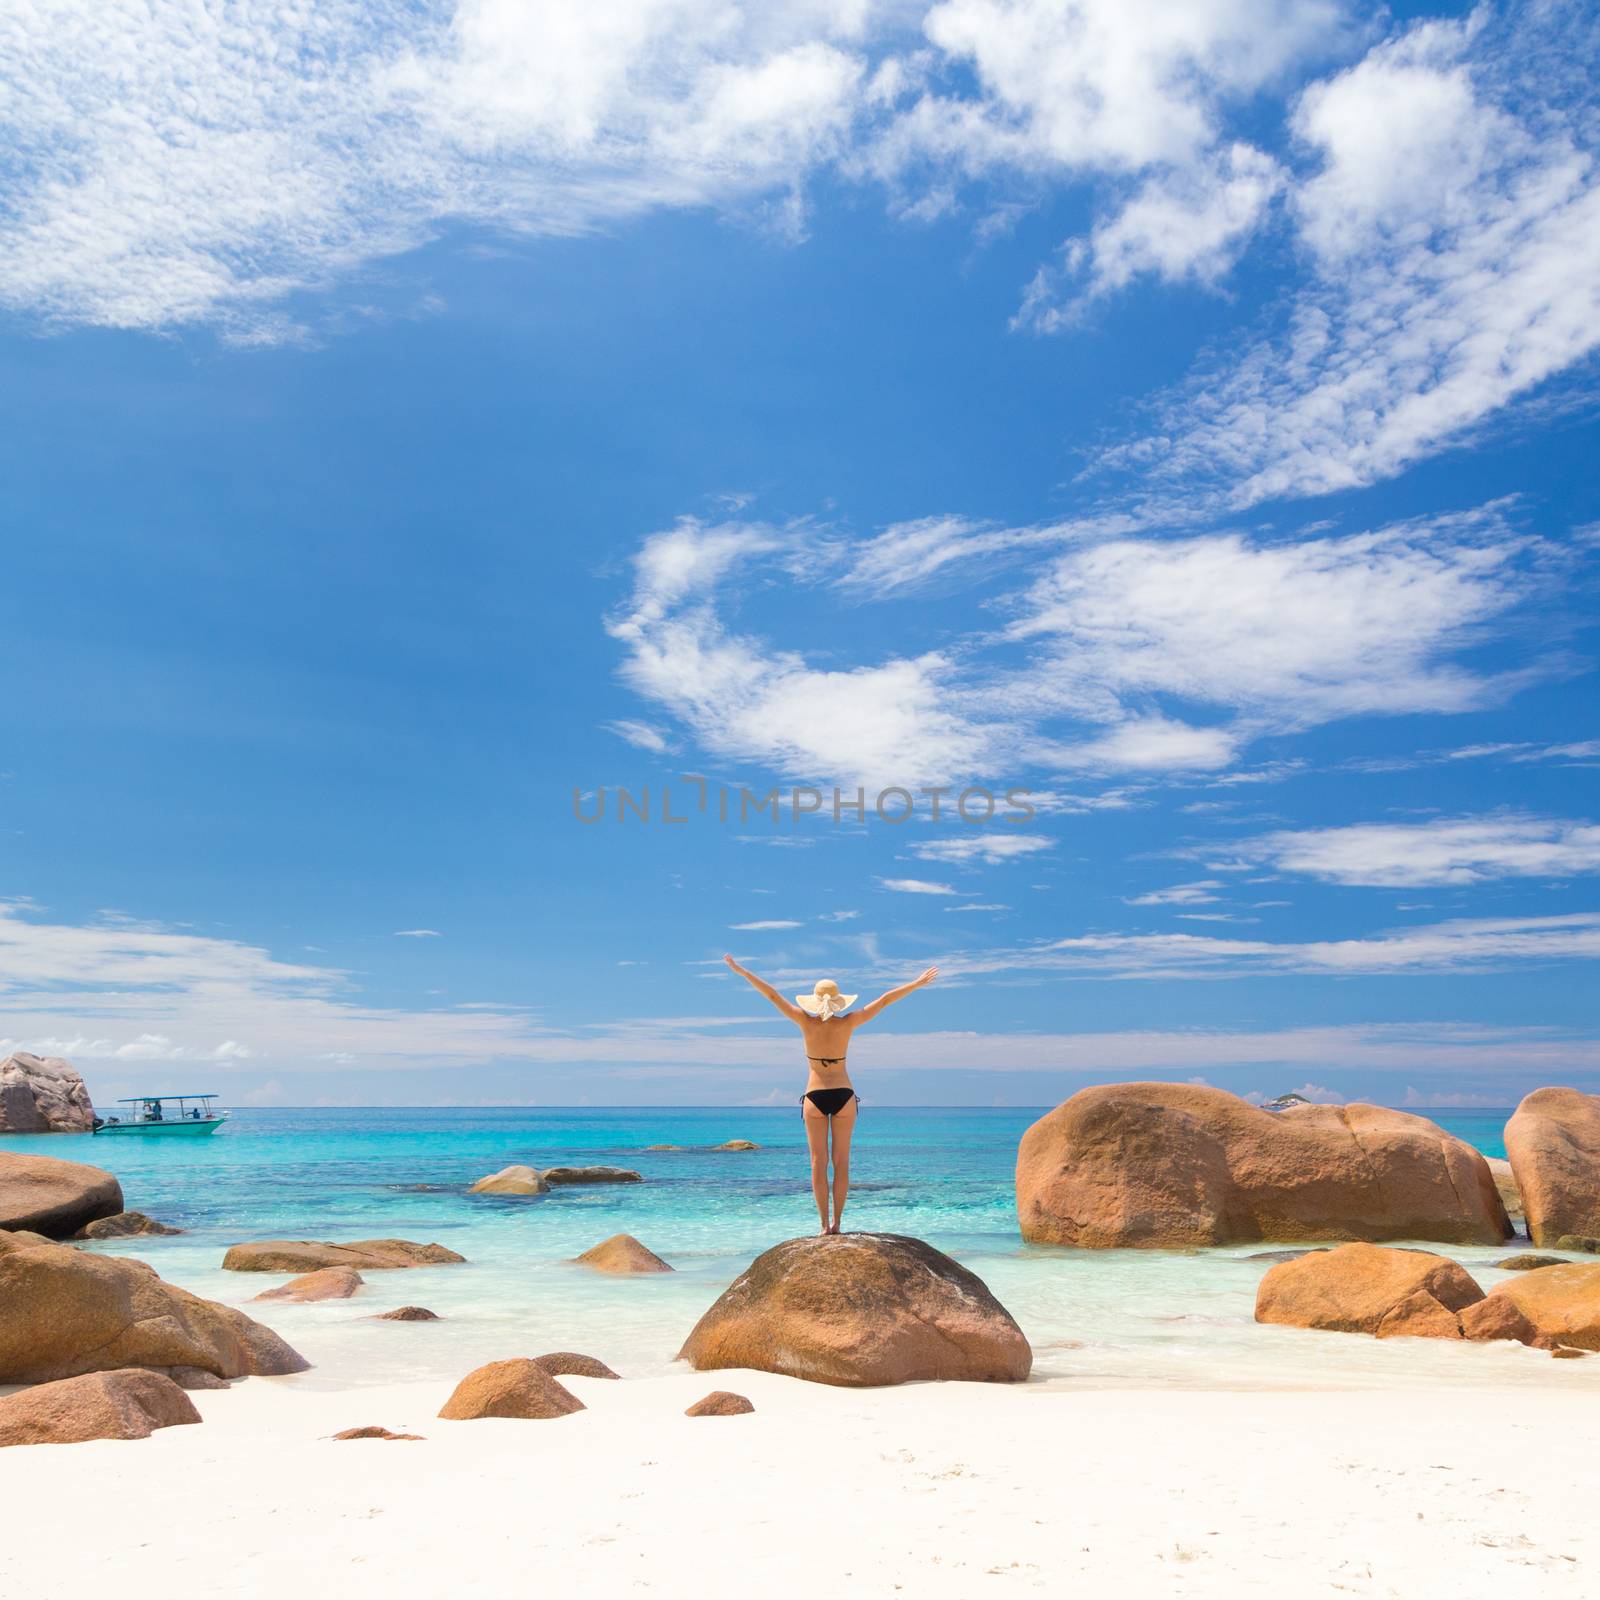 Woman, arms rised, wearing black bikini and beach hat, enjoying amazing view on Anse Lazio beach on Praslin Island, Seychelles. Summer vacations on picture perfect tropical beach concept. Copy space.